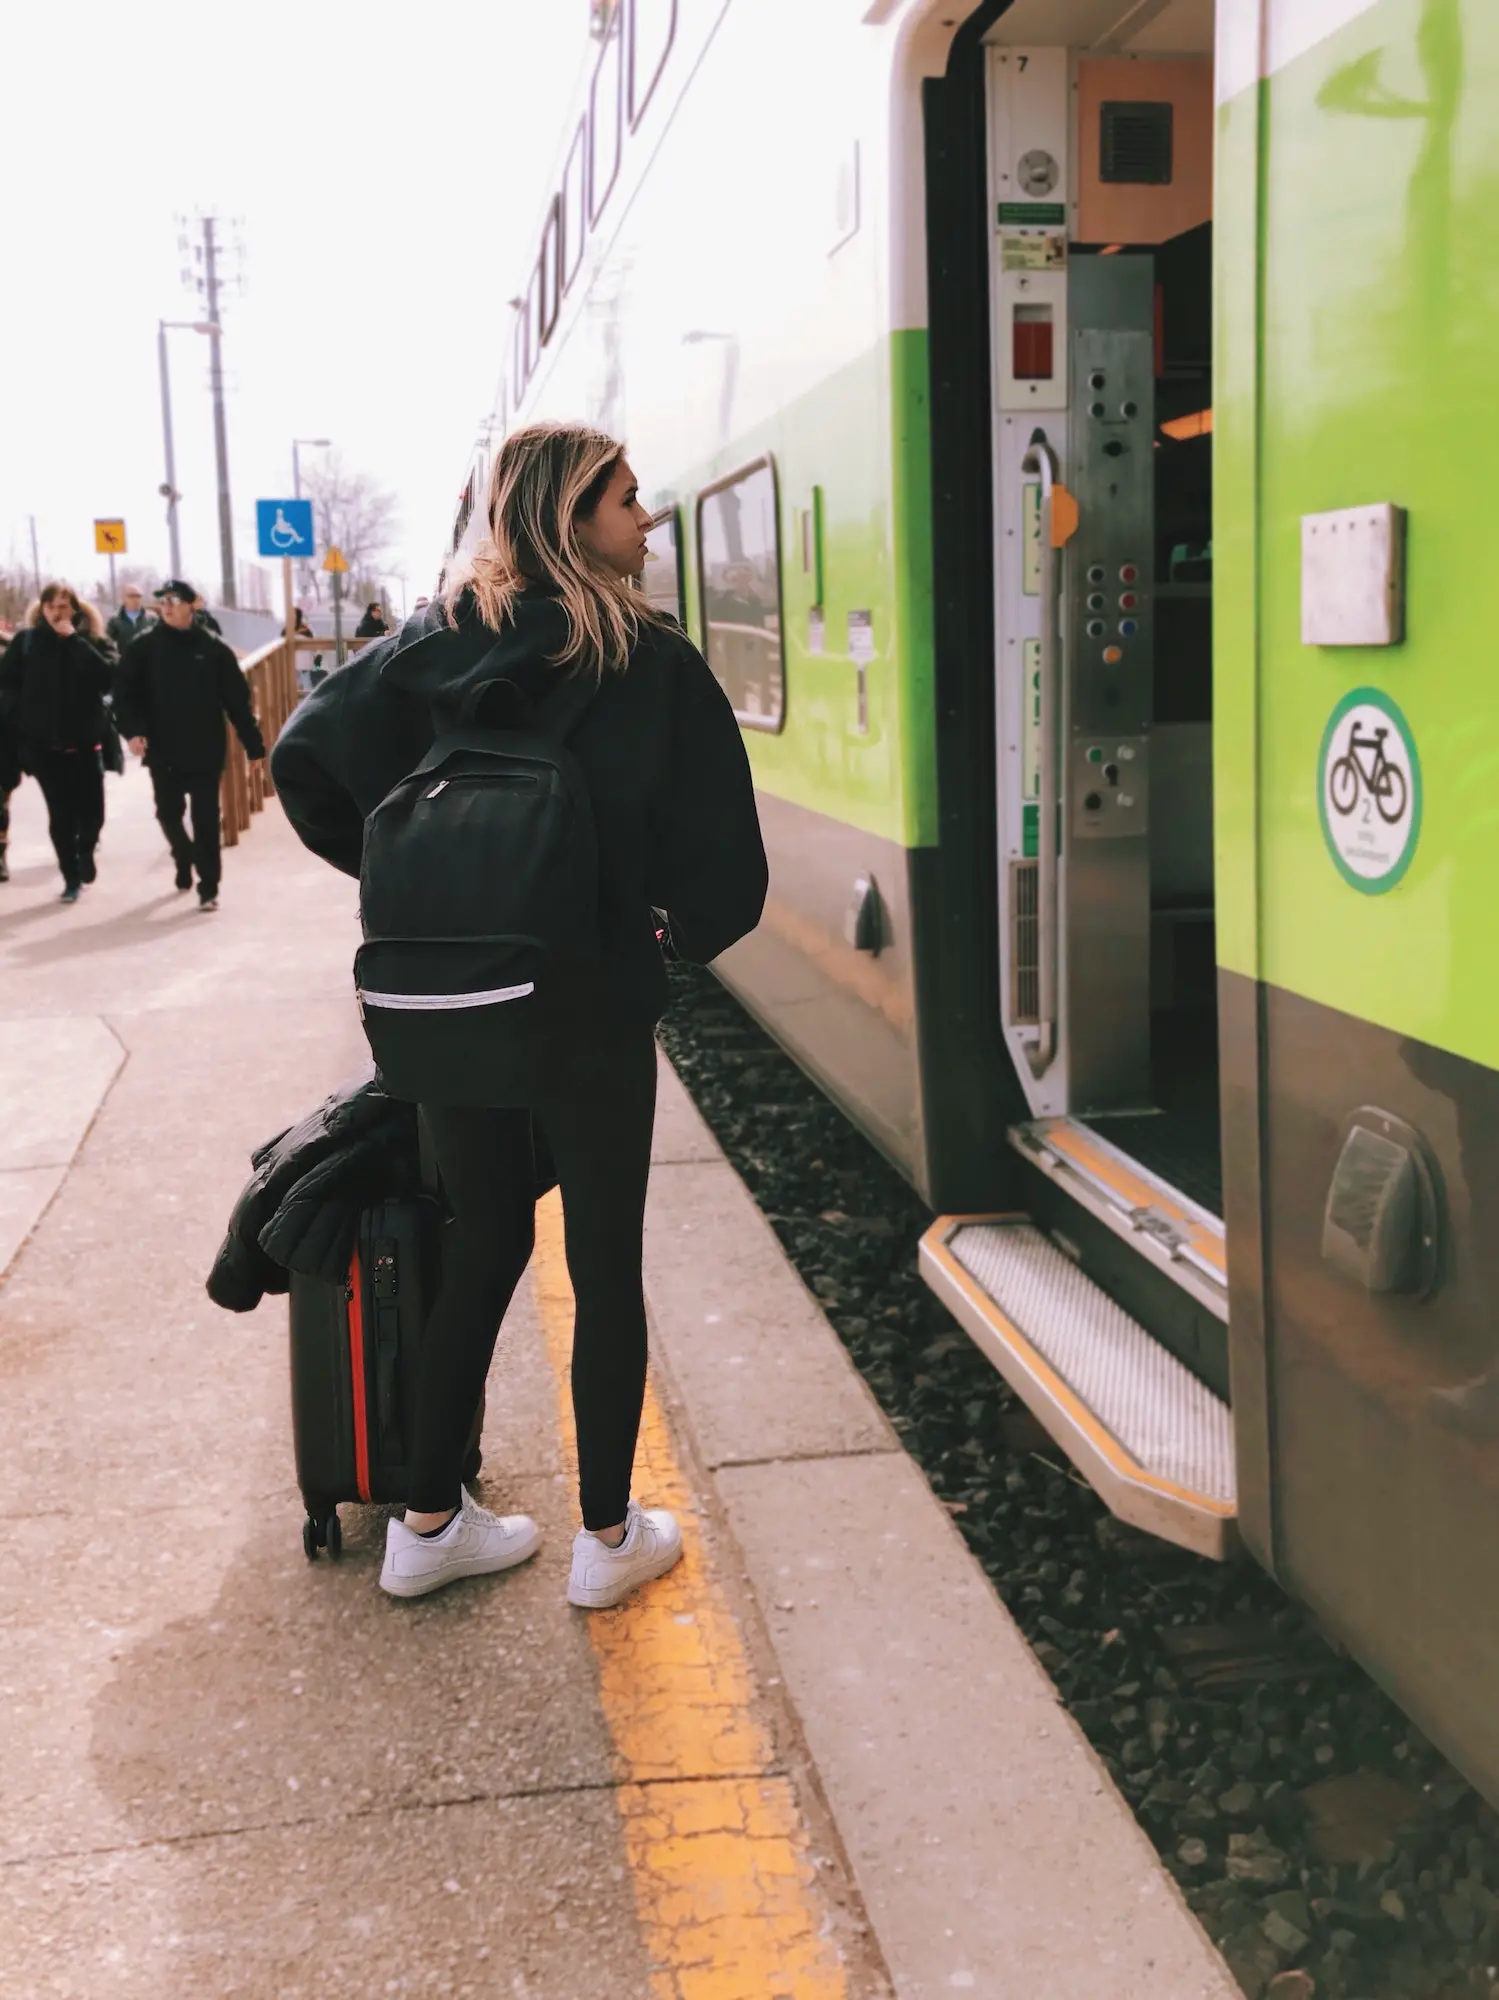 Young girl with a suitcase and backpack is getting on a train, public transportation